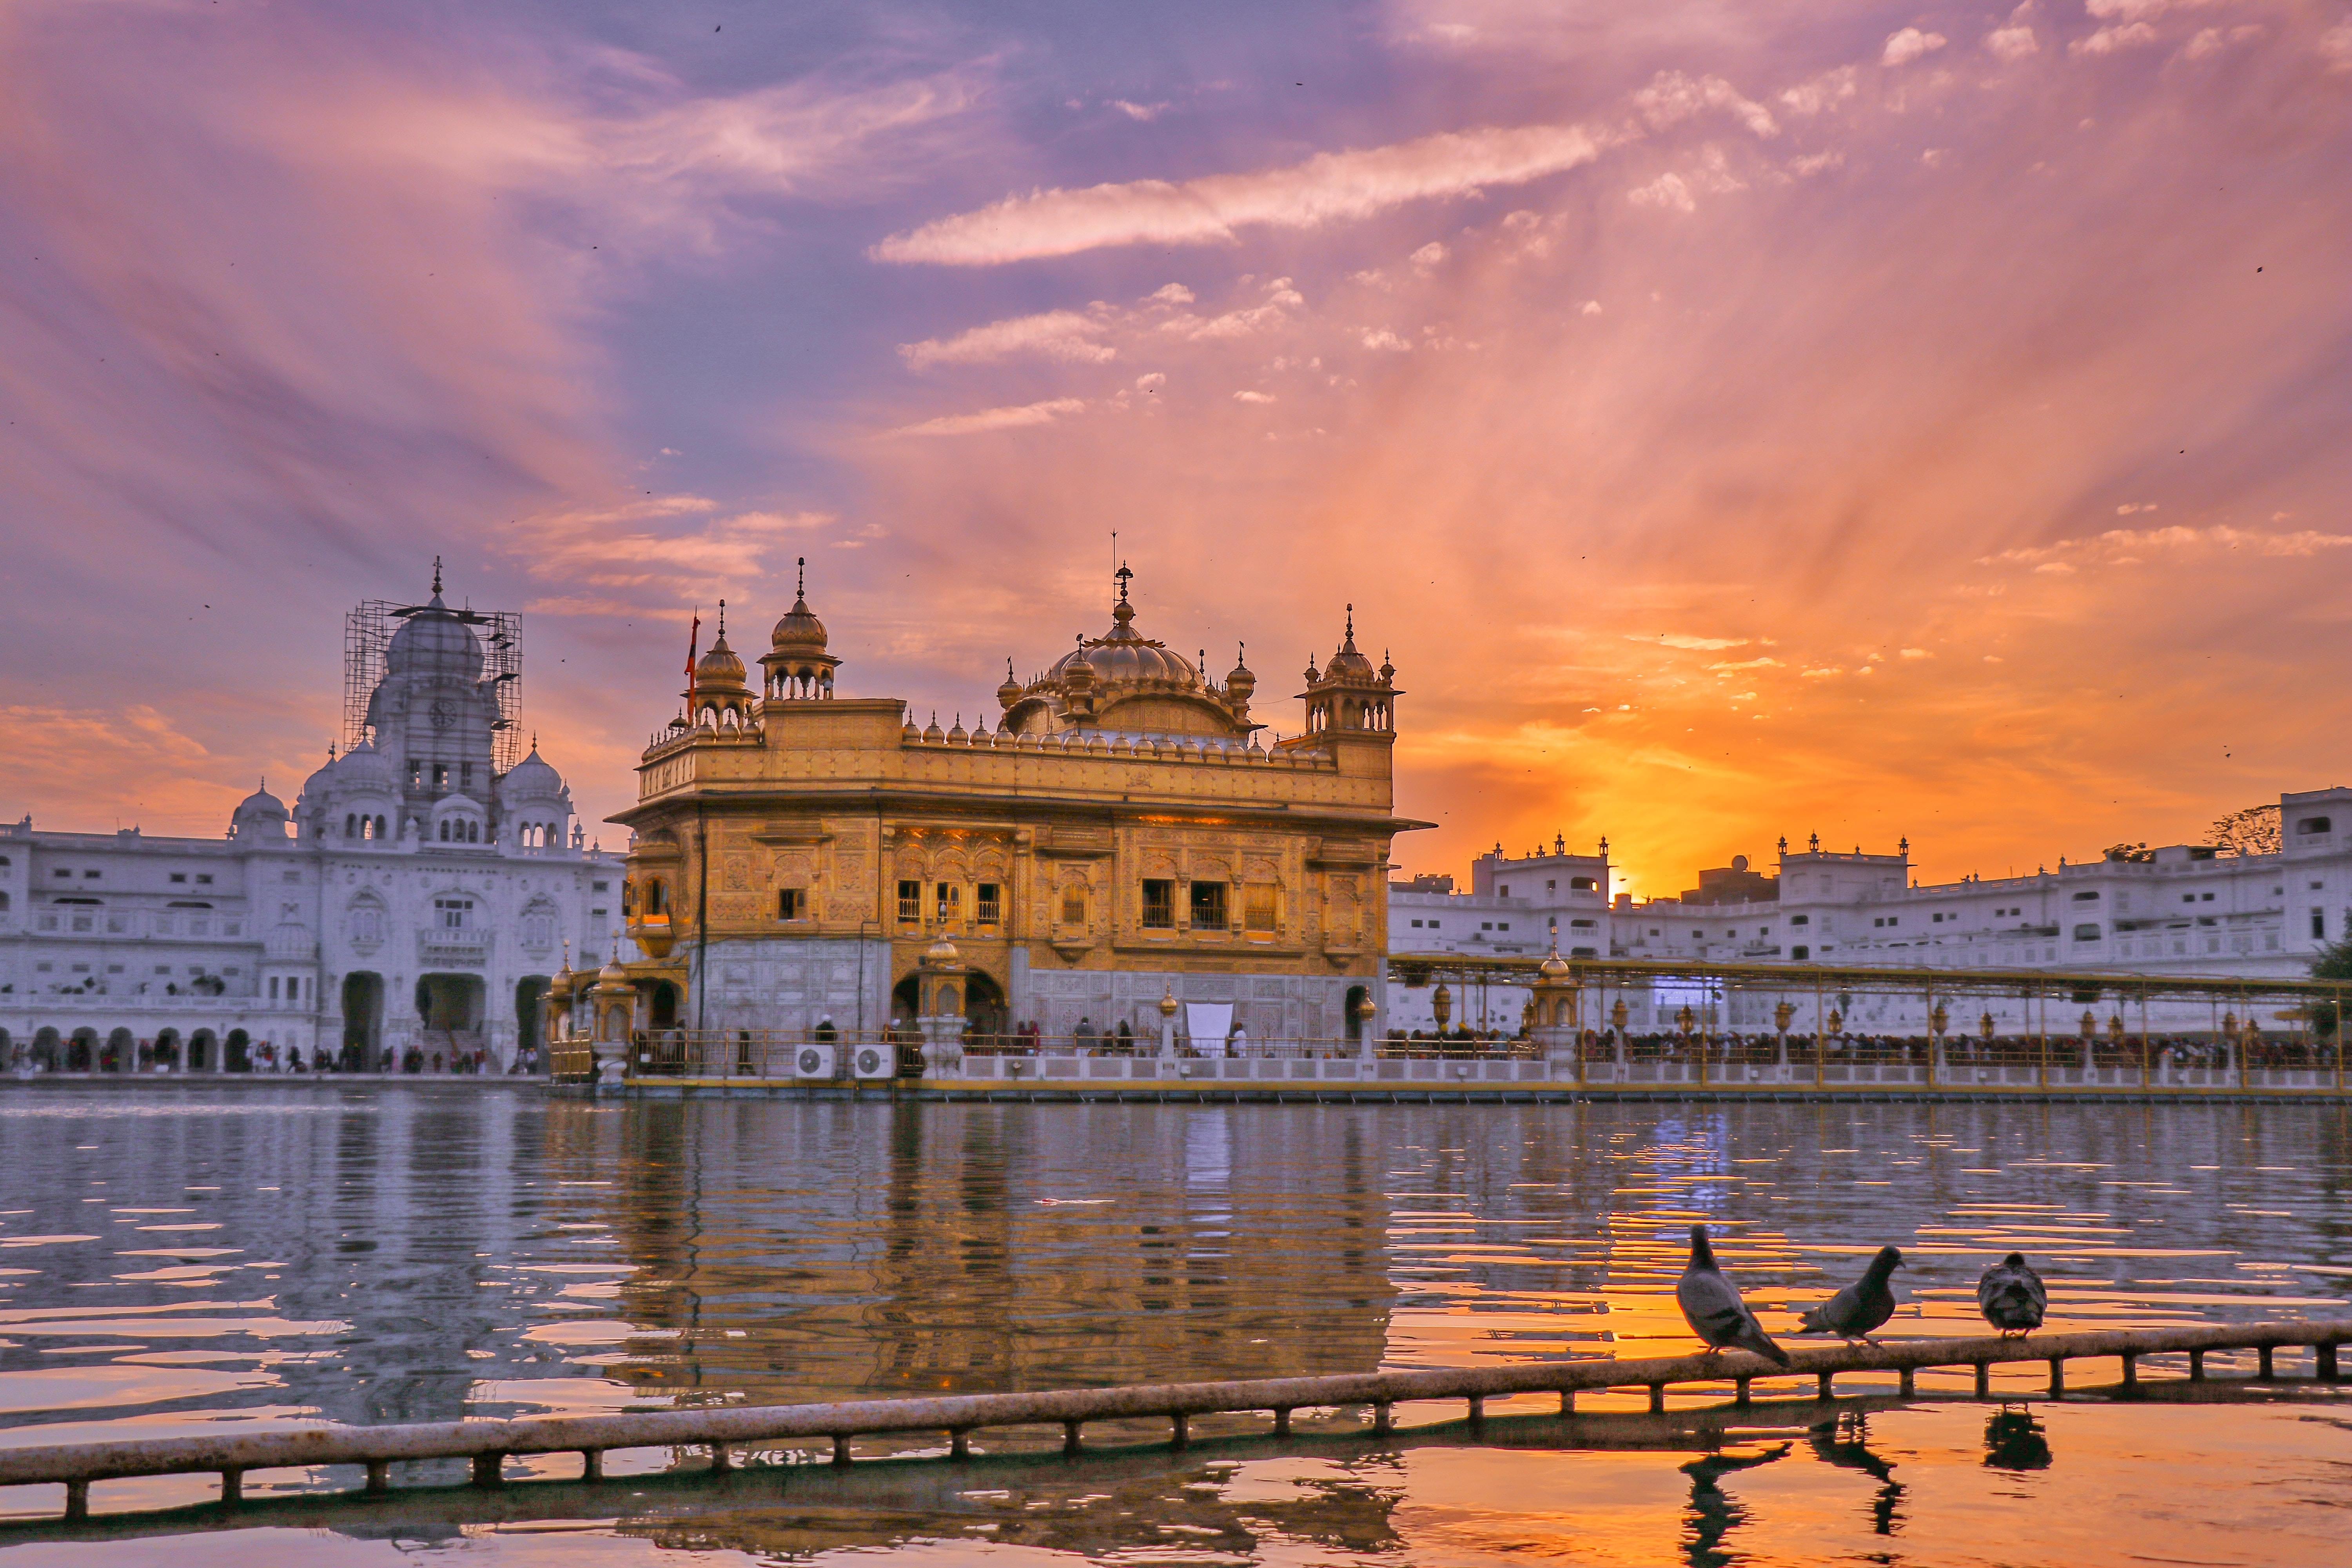 Experience divine tranquility at the serene & stunning Golden Temple